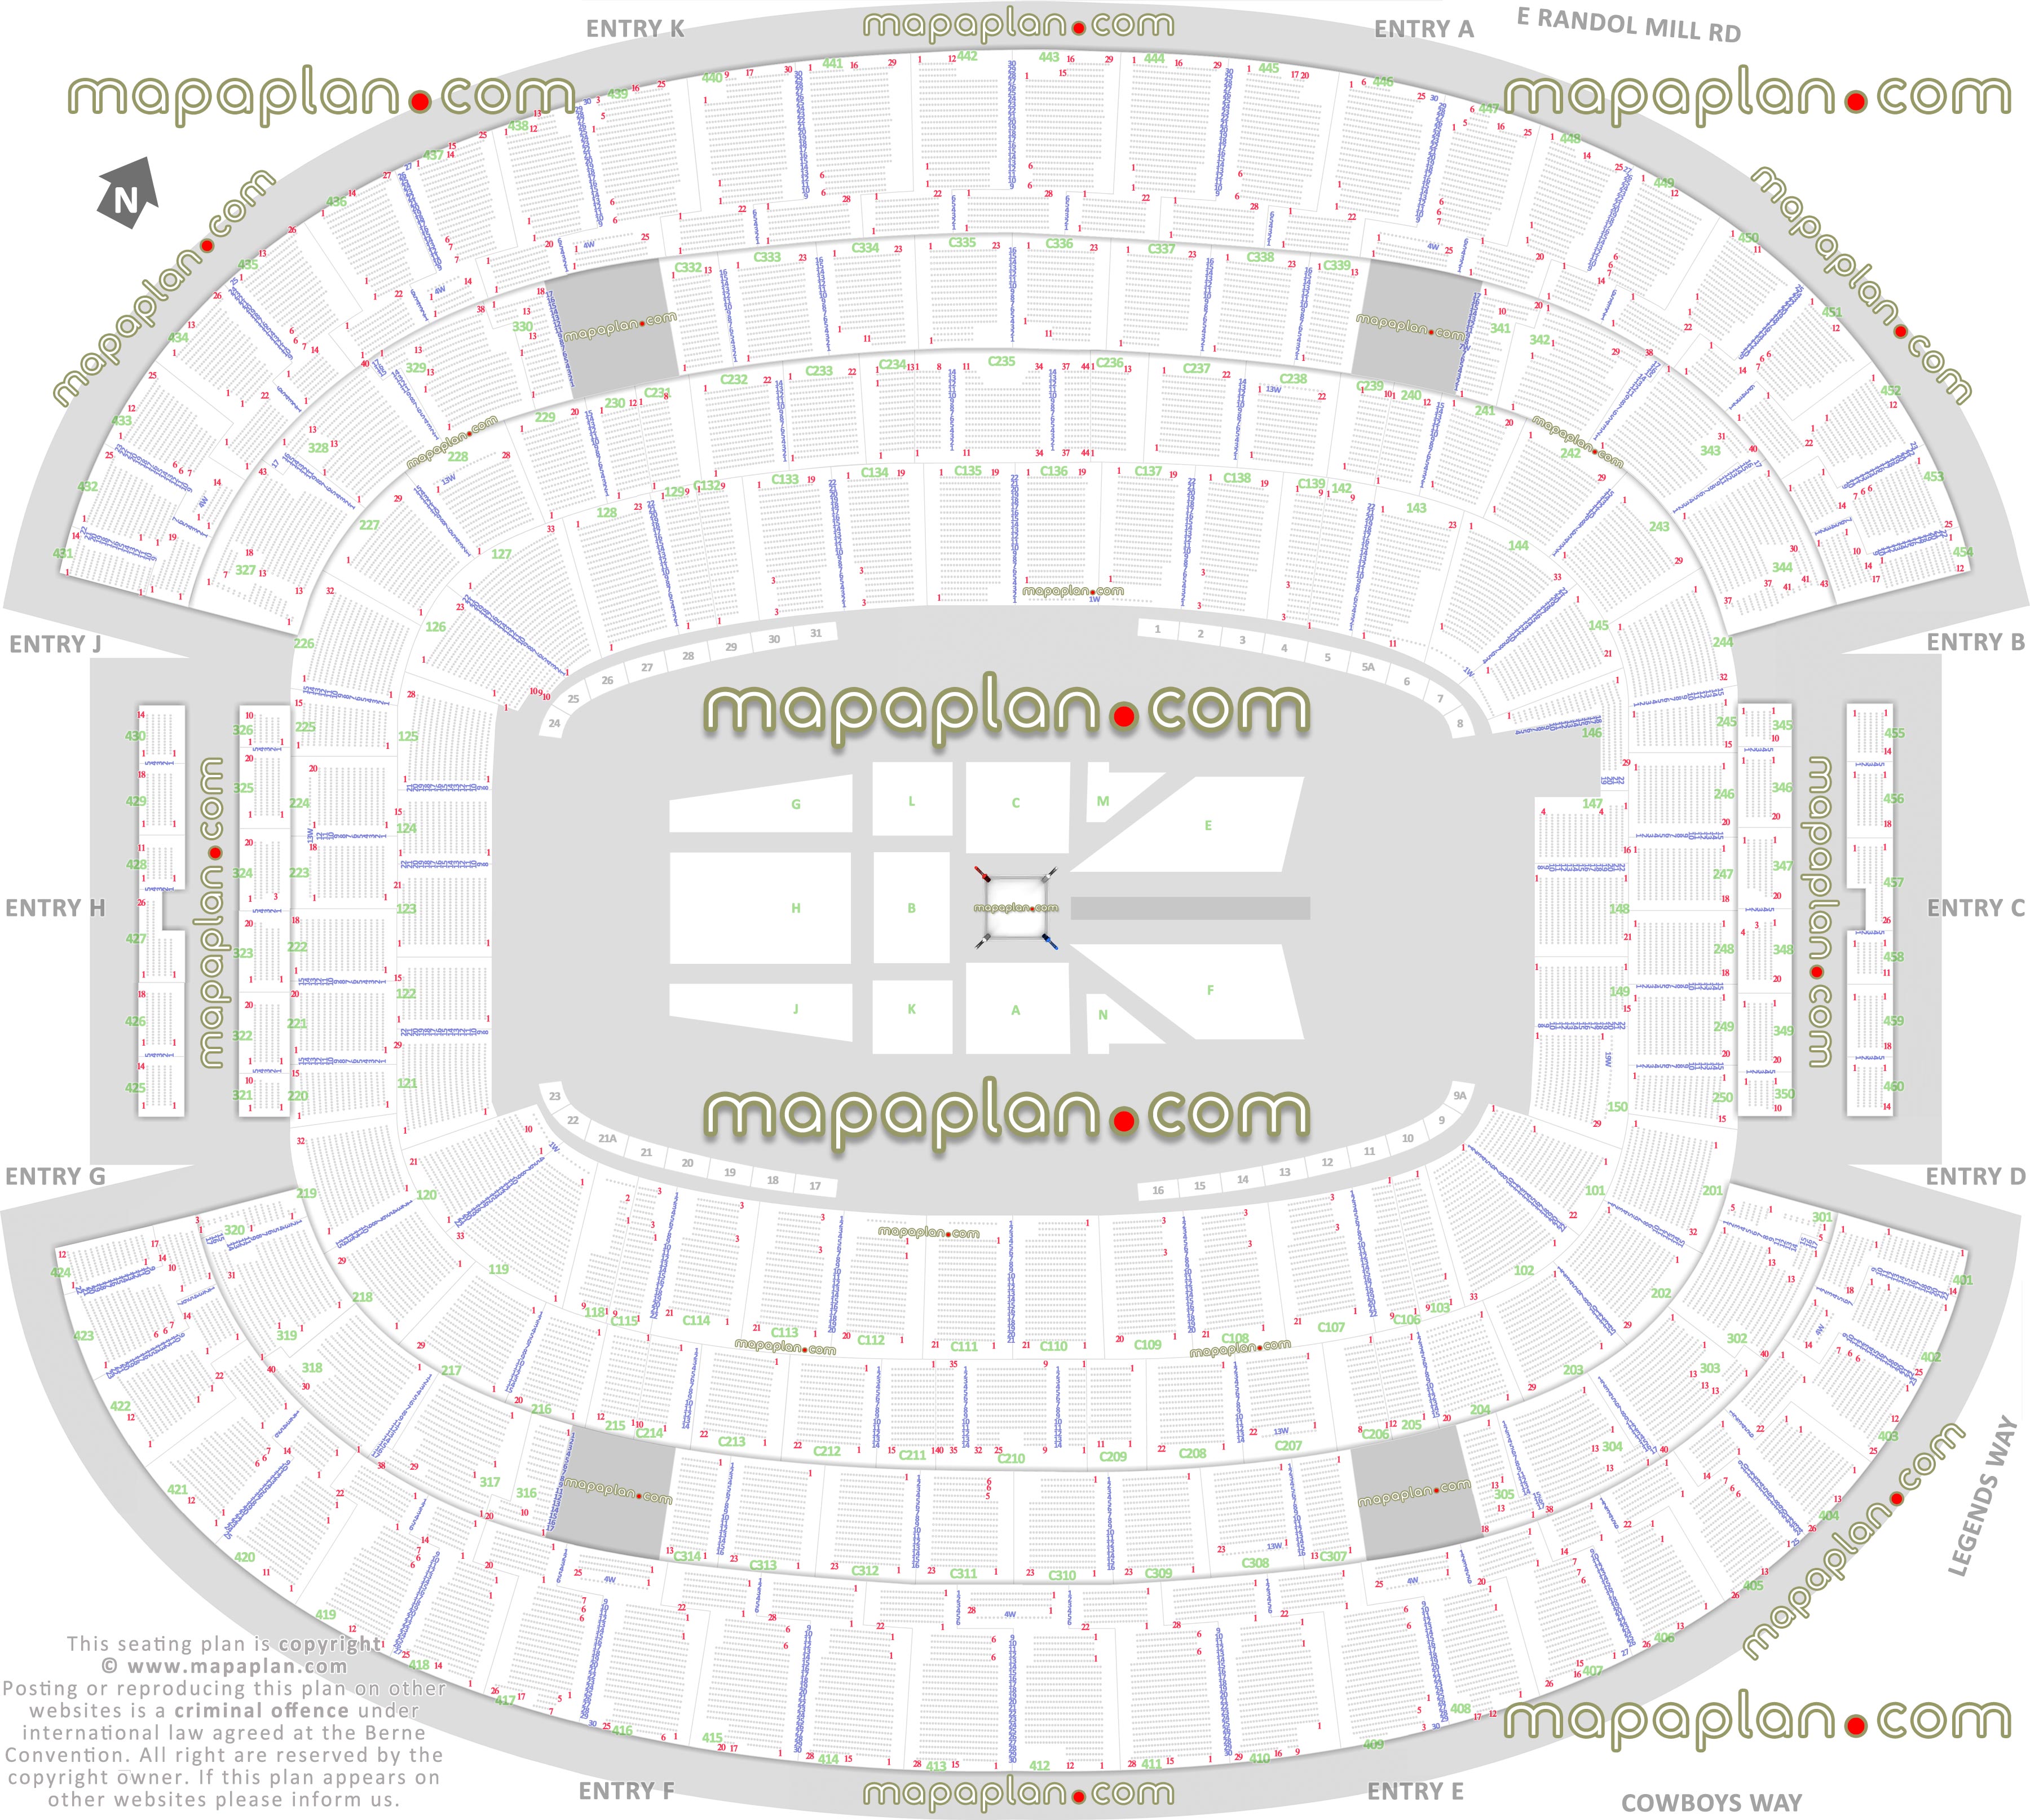 wwe wrestlemania raw smackdown wrestling boxing match events dallas cowboys stadium texas map row numbers 360 round ring floor configuration diagram rows hall fame main mezzanine upper concourse sections 401 402 403 404 405 406 407 408 409 410 411 412 413 414 415 416 417 418 419 420 421 422 423 424 425 426 427 428 429 430 431 432 433 434 435 436 437 438 439 440 441 442 443 444 445 446 447 448 449 450 Dallas Cowboys ATT Stadium seating chart